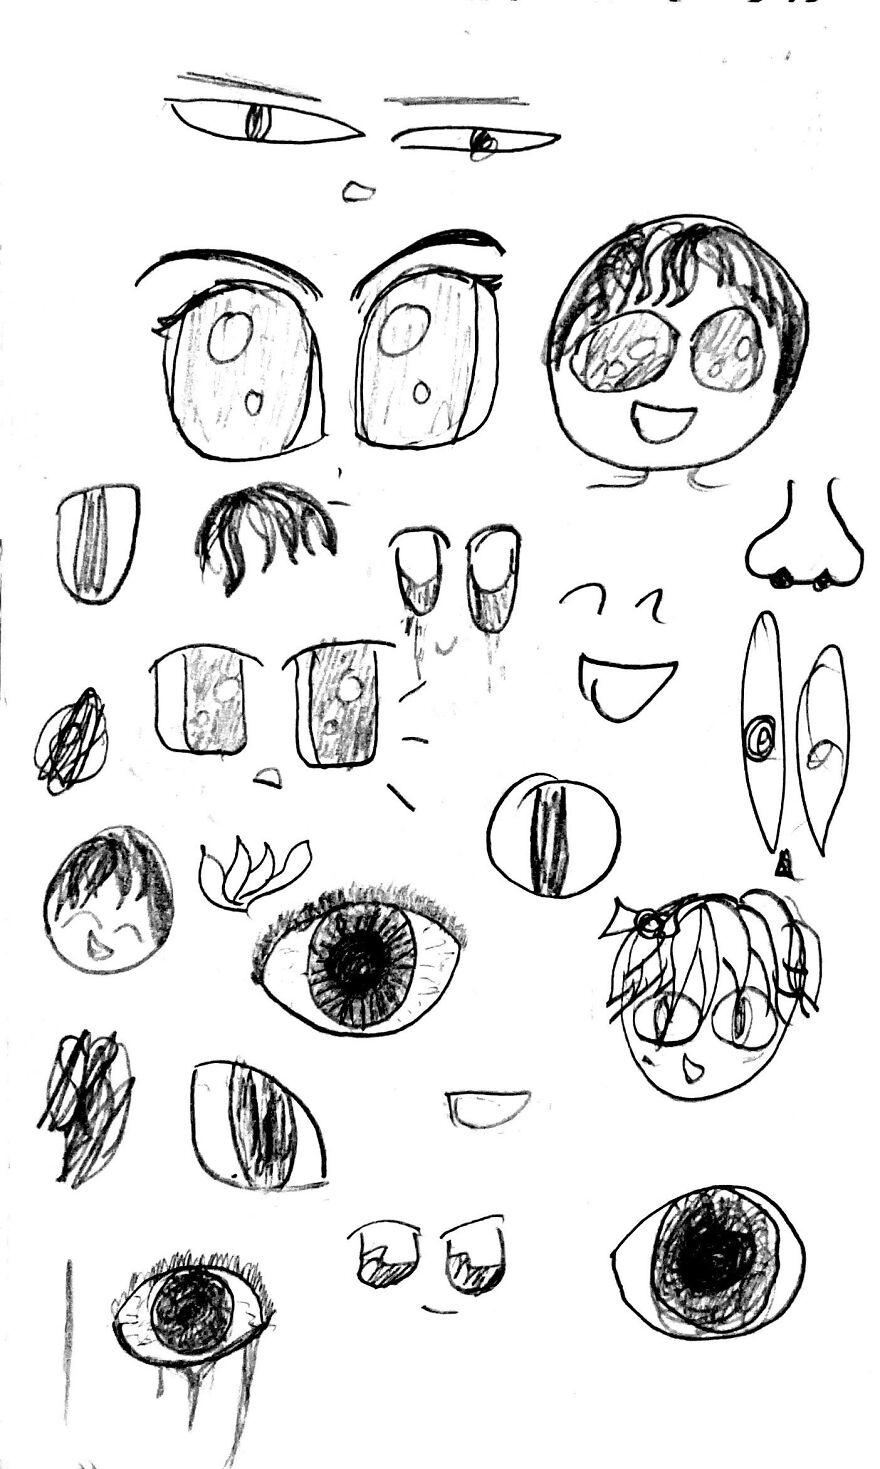 I Made Ten Drawings At 2:00 Am Because I Was Bored.